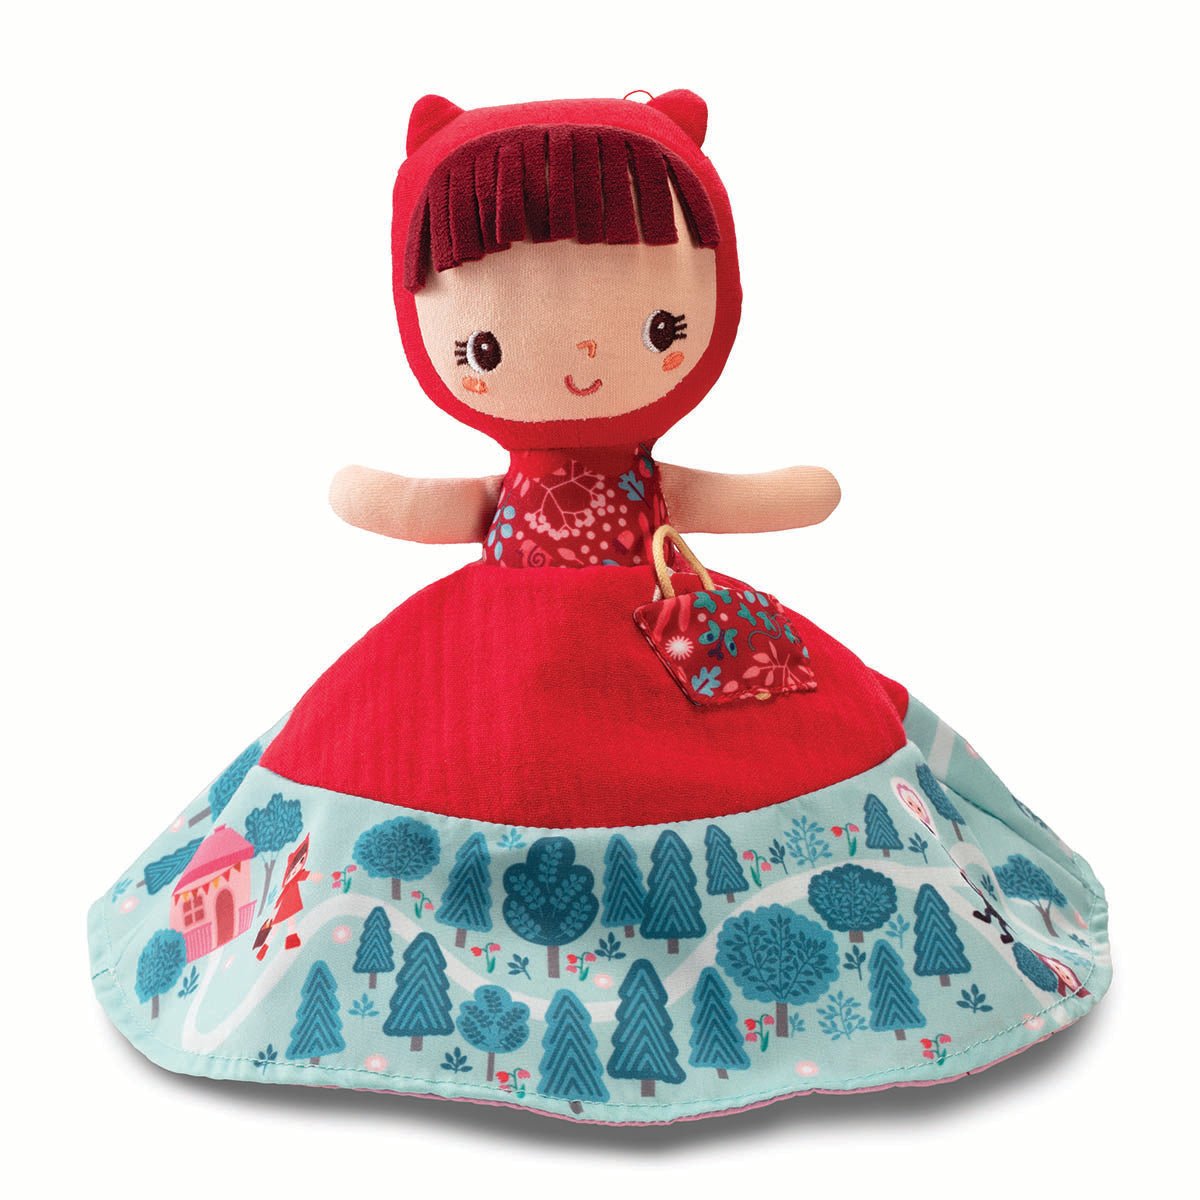 Reversible Little Red Riding Hood Doll | Lilliputiens